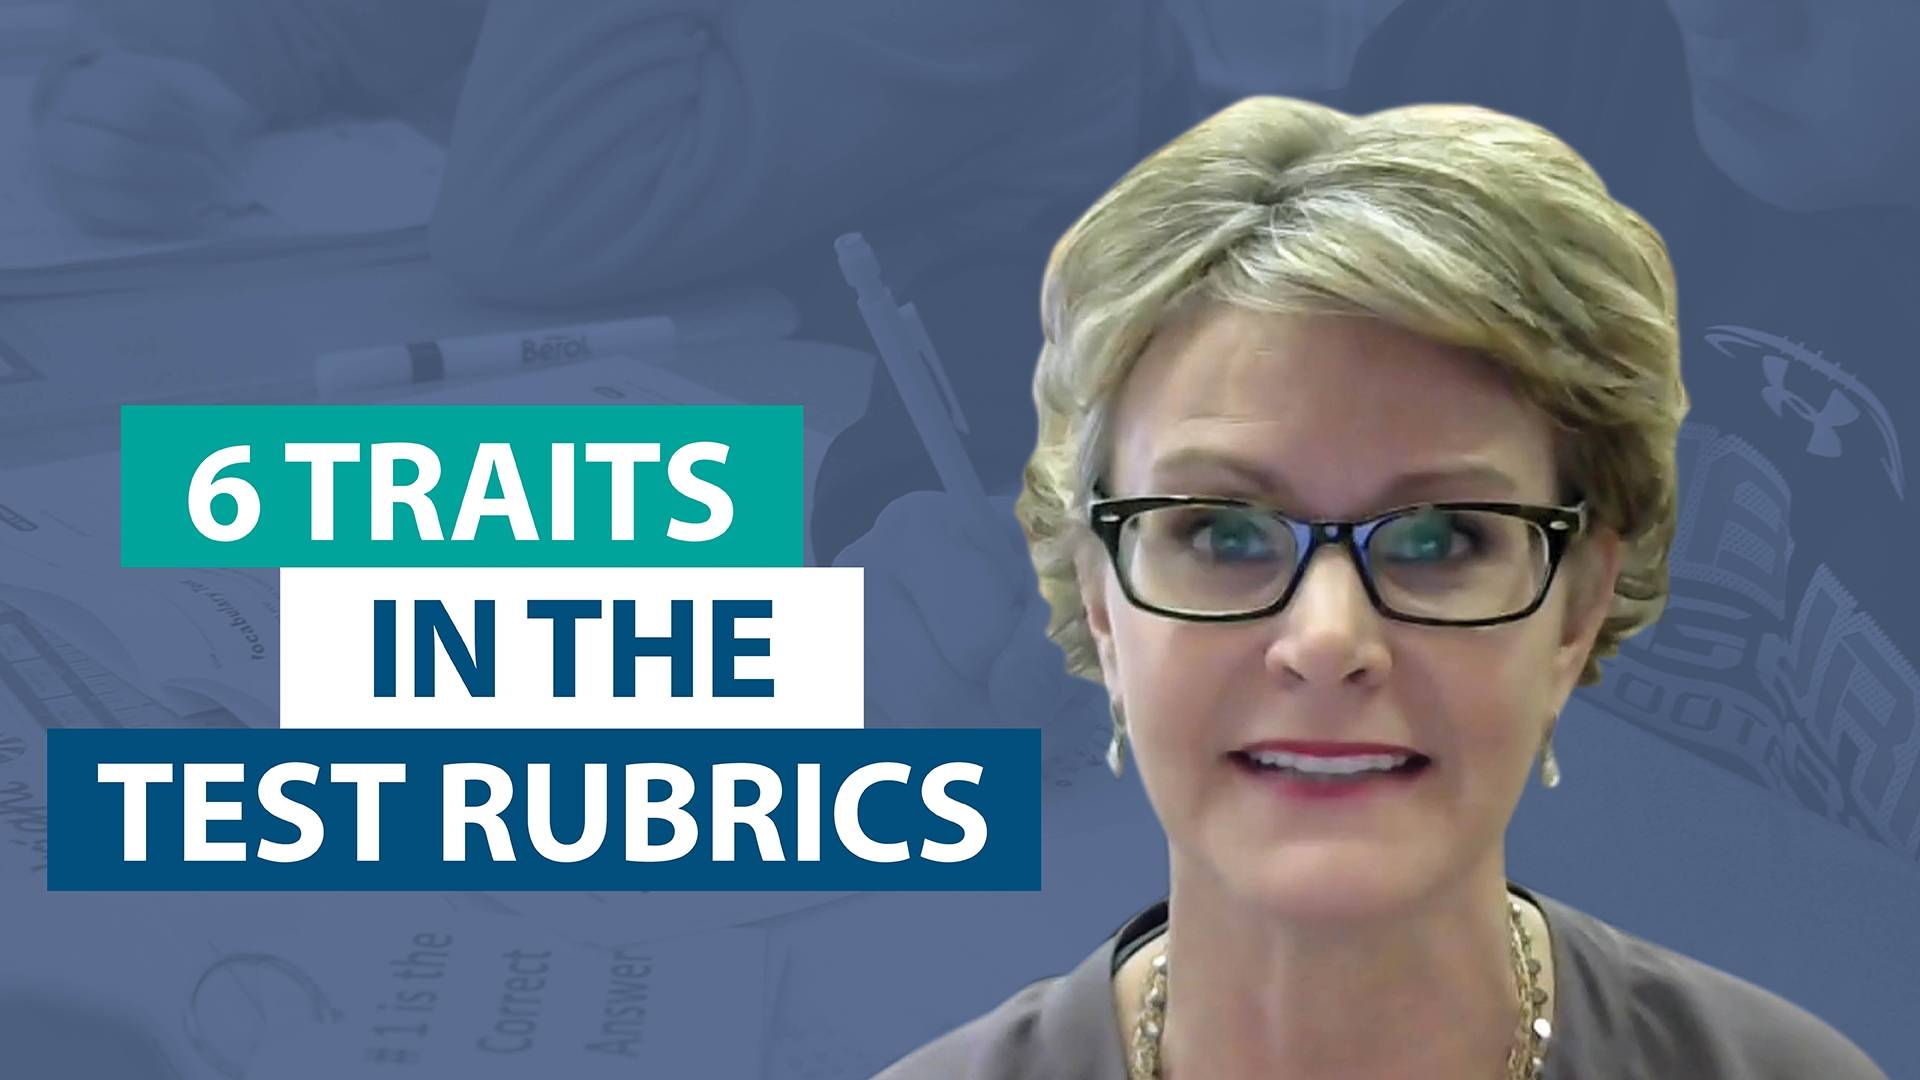 How do 6 Traits fit within state writing rubrics